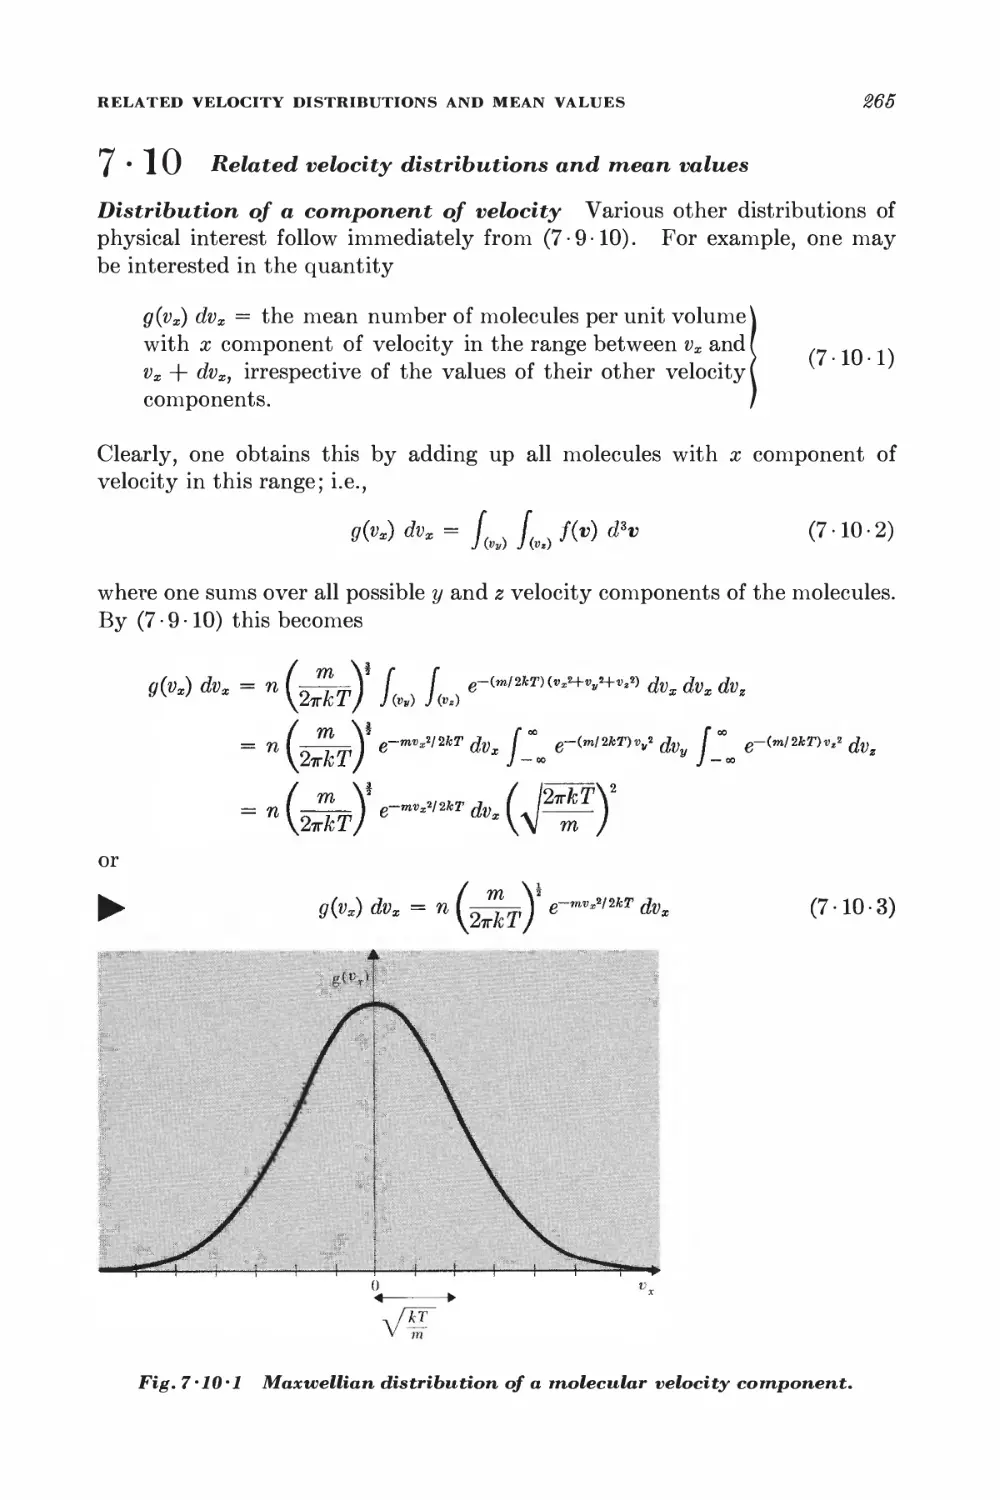 7.10 Related velocity distributions and mean values